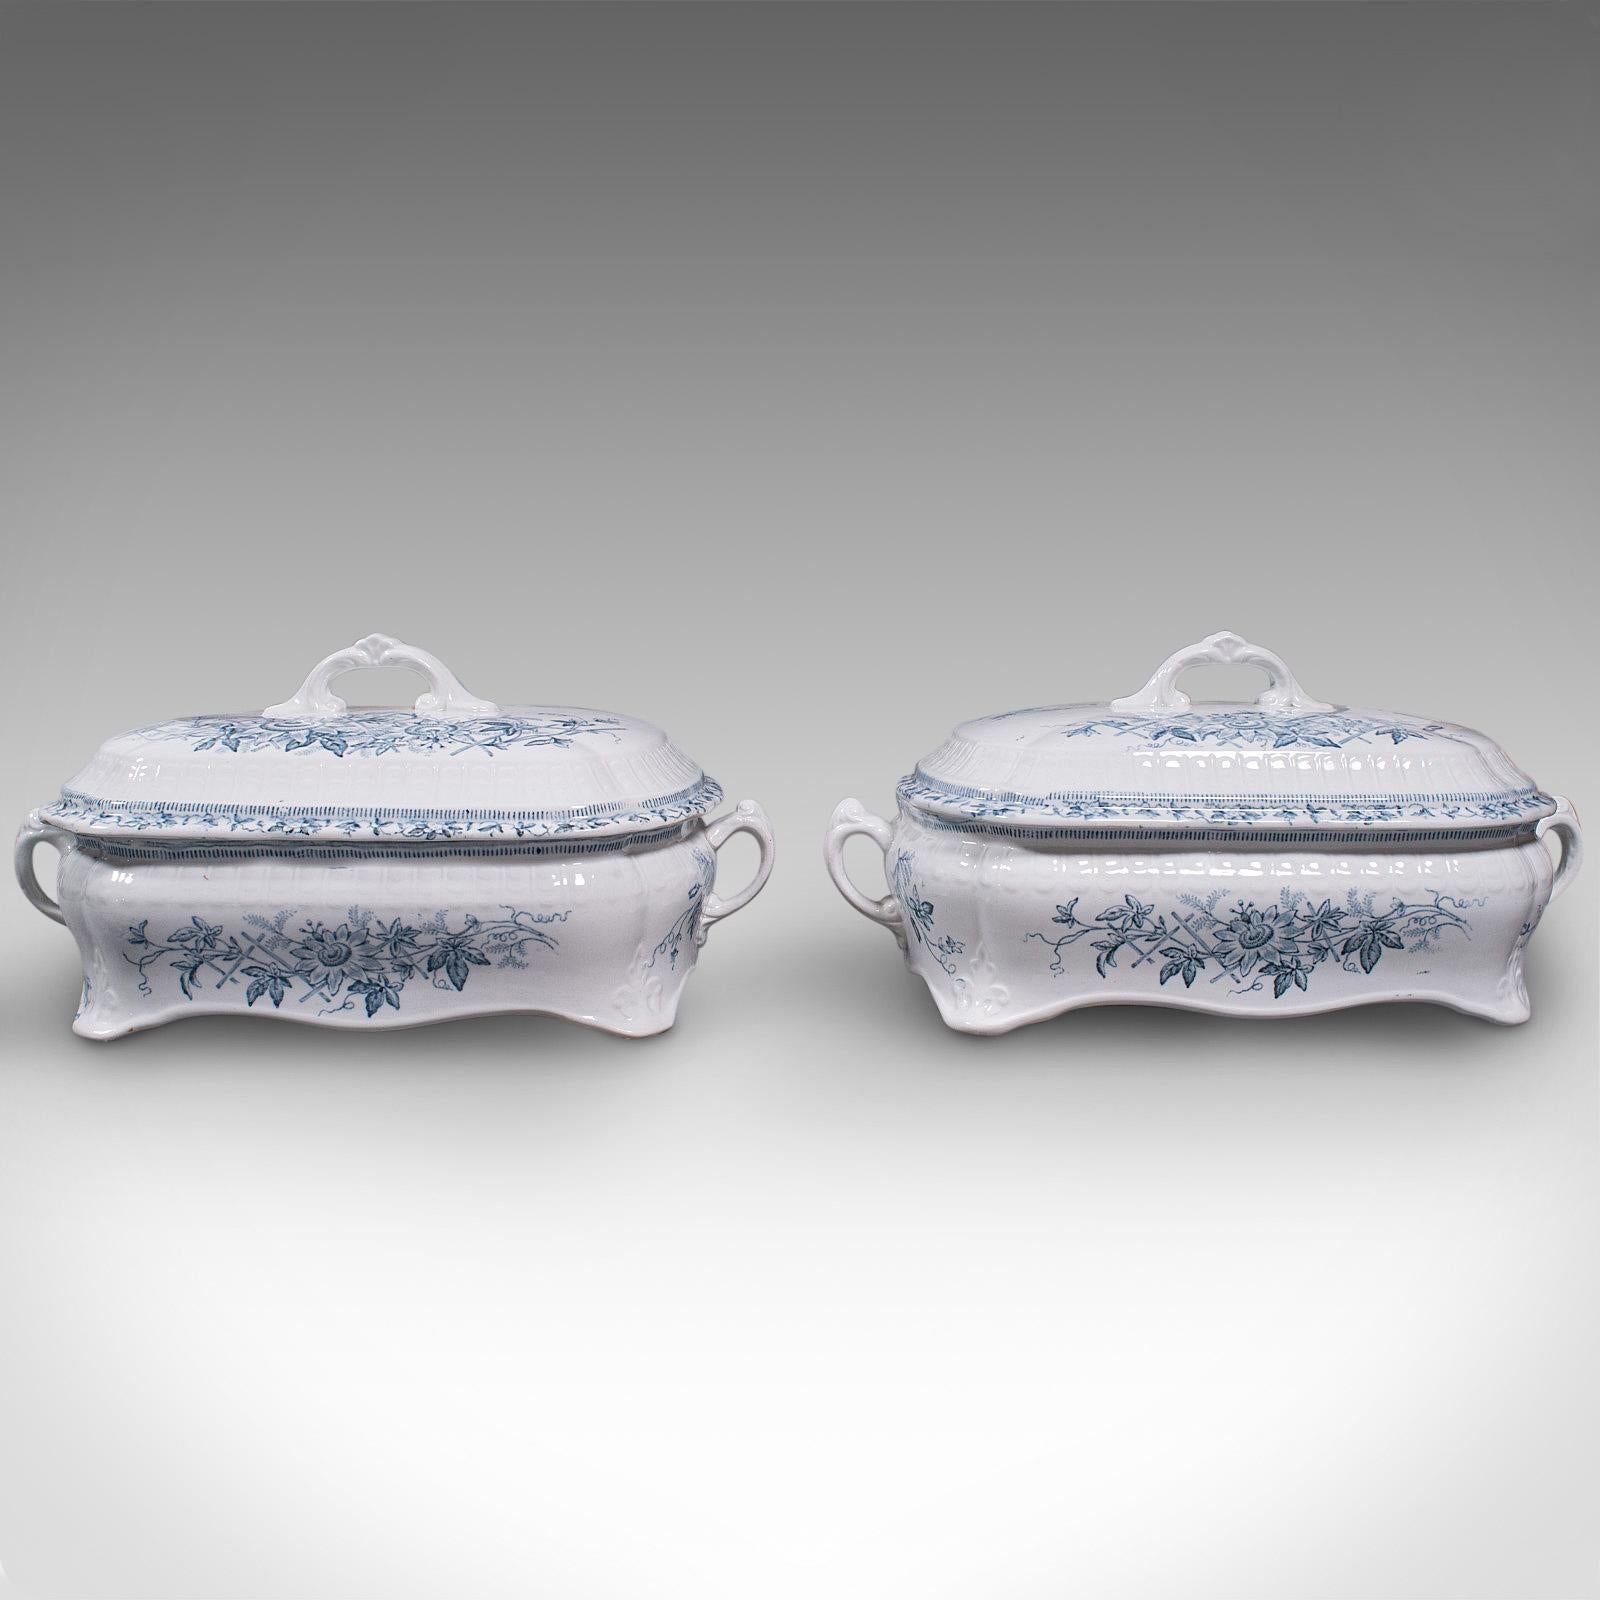 This is a pair of antique serving tureens. An English, ceramic lidded dish, dating to the late Victorian period, circa 1900.

Clear, bright ceramic tureens with appealing blue and white decoration
Displaying a desirable aged patina and in good